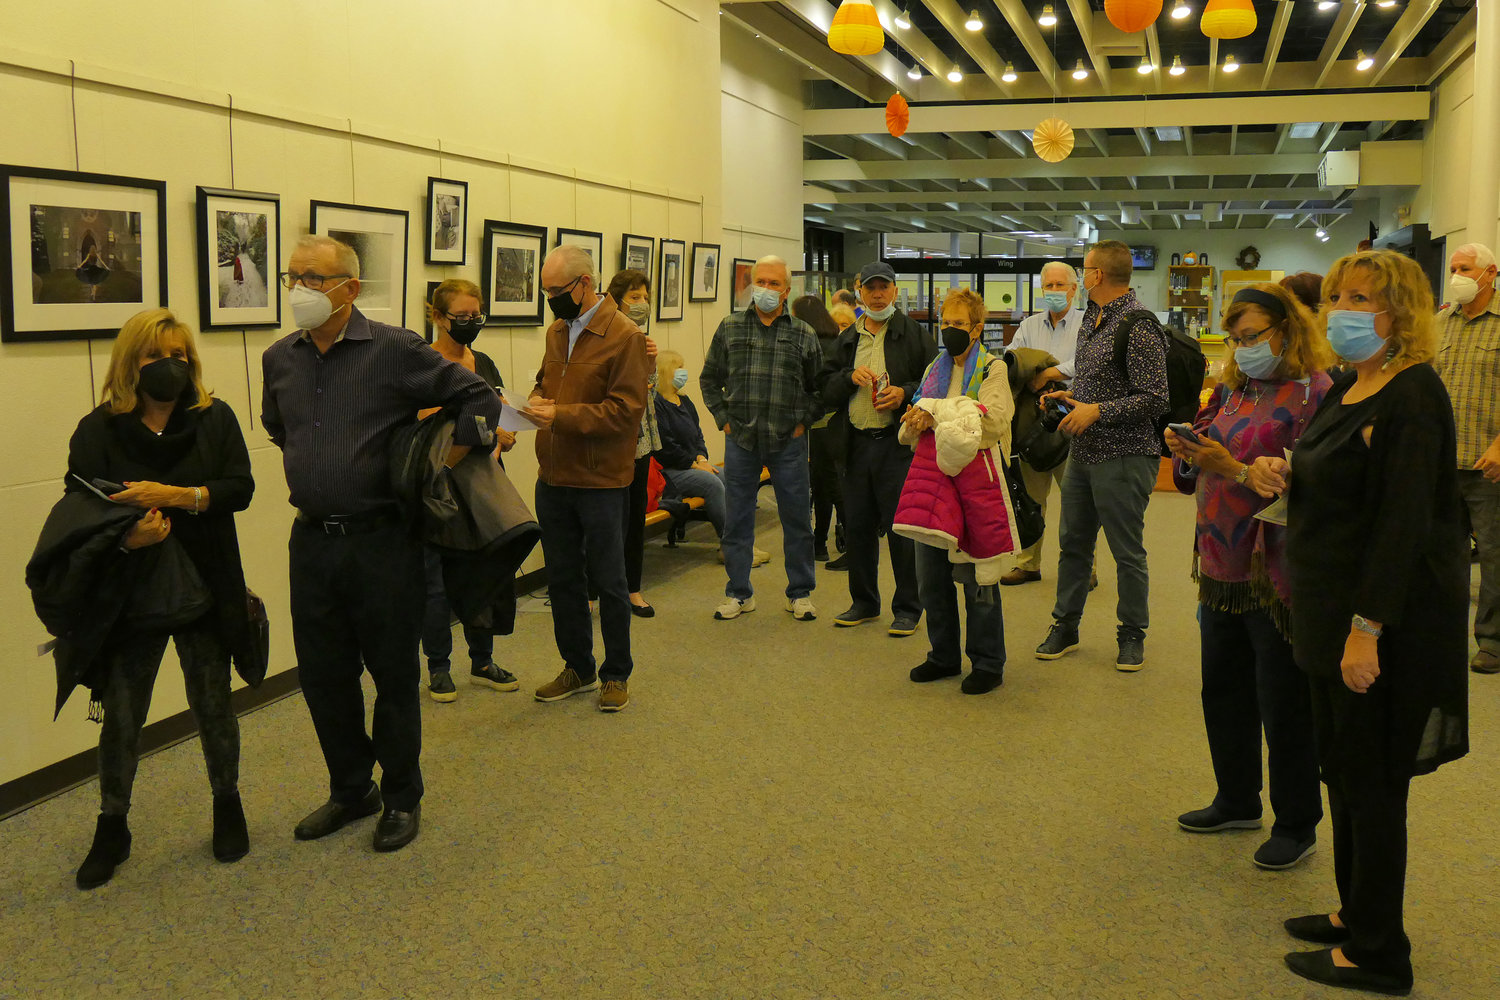 Visitors to the awards ceremony for the photography show discussed the winning photos before the ceremony began.